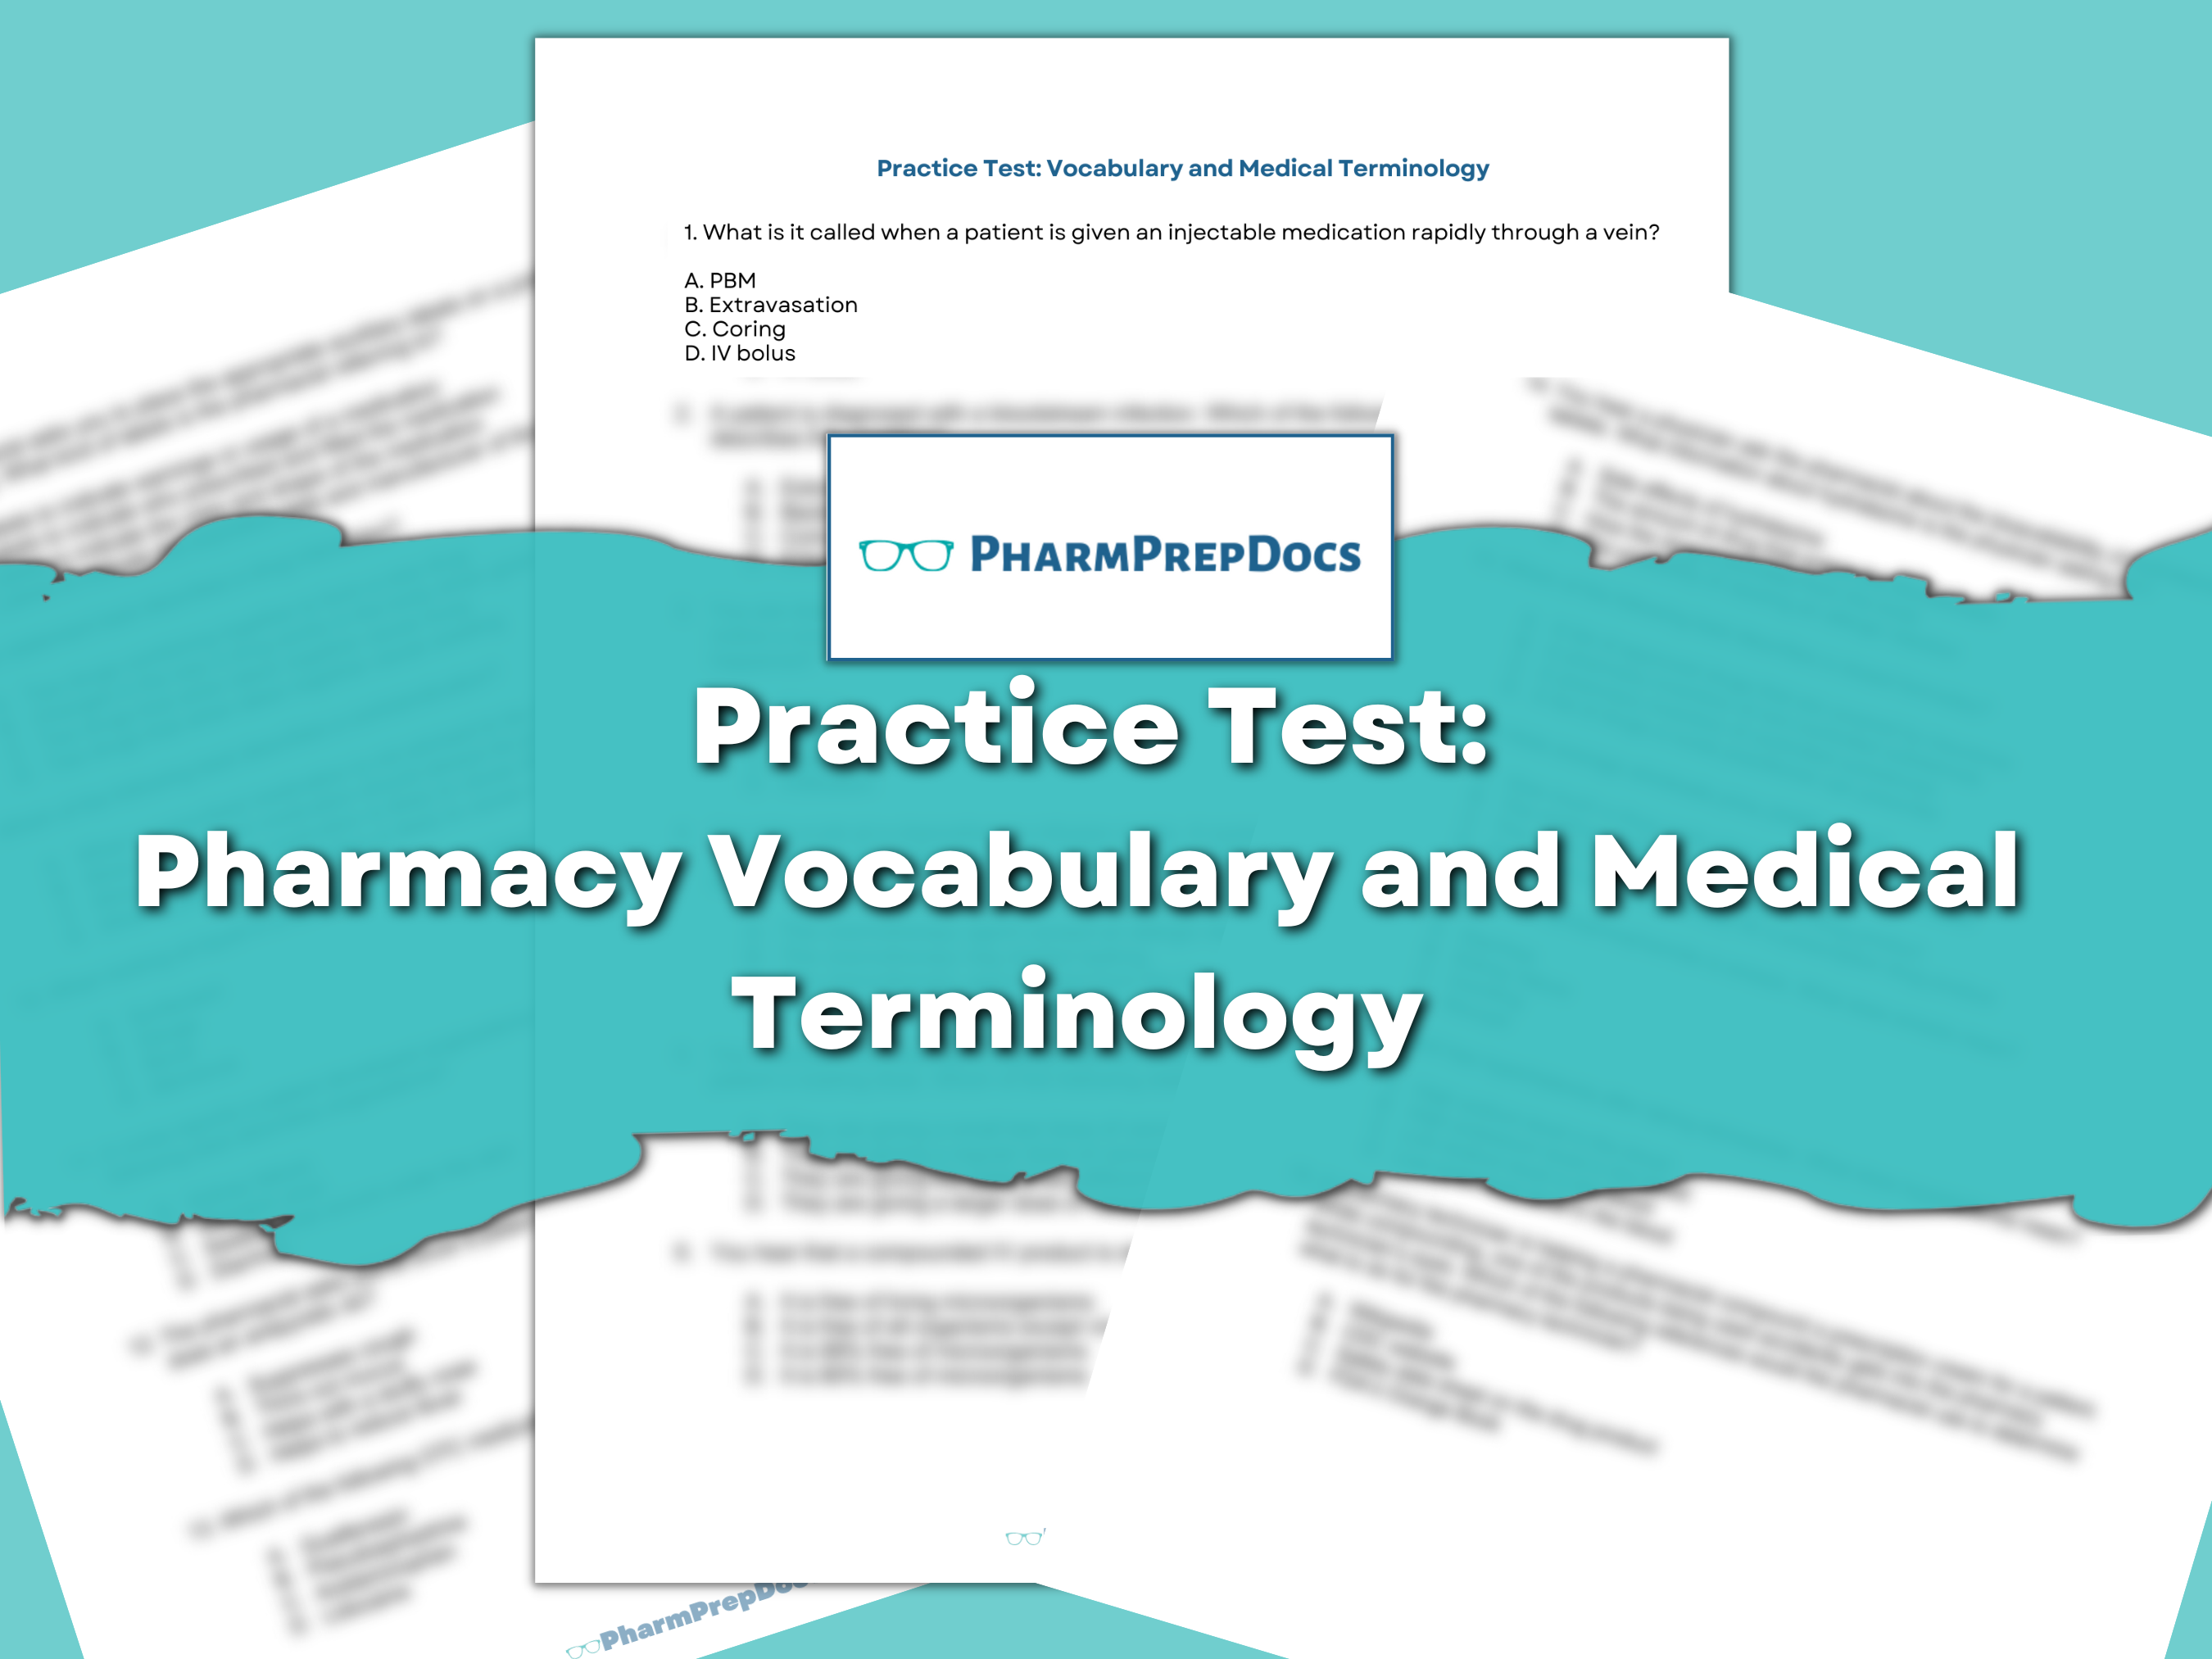 Practice Test: Pharmacy Vocabulary and Medical Terminology